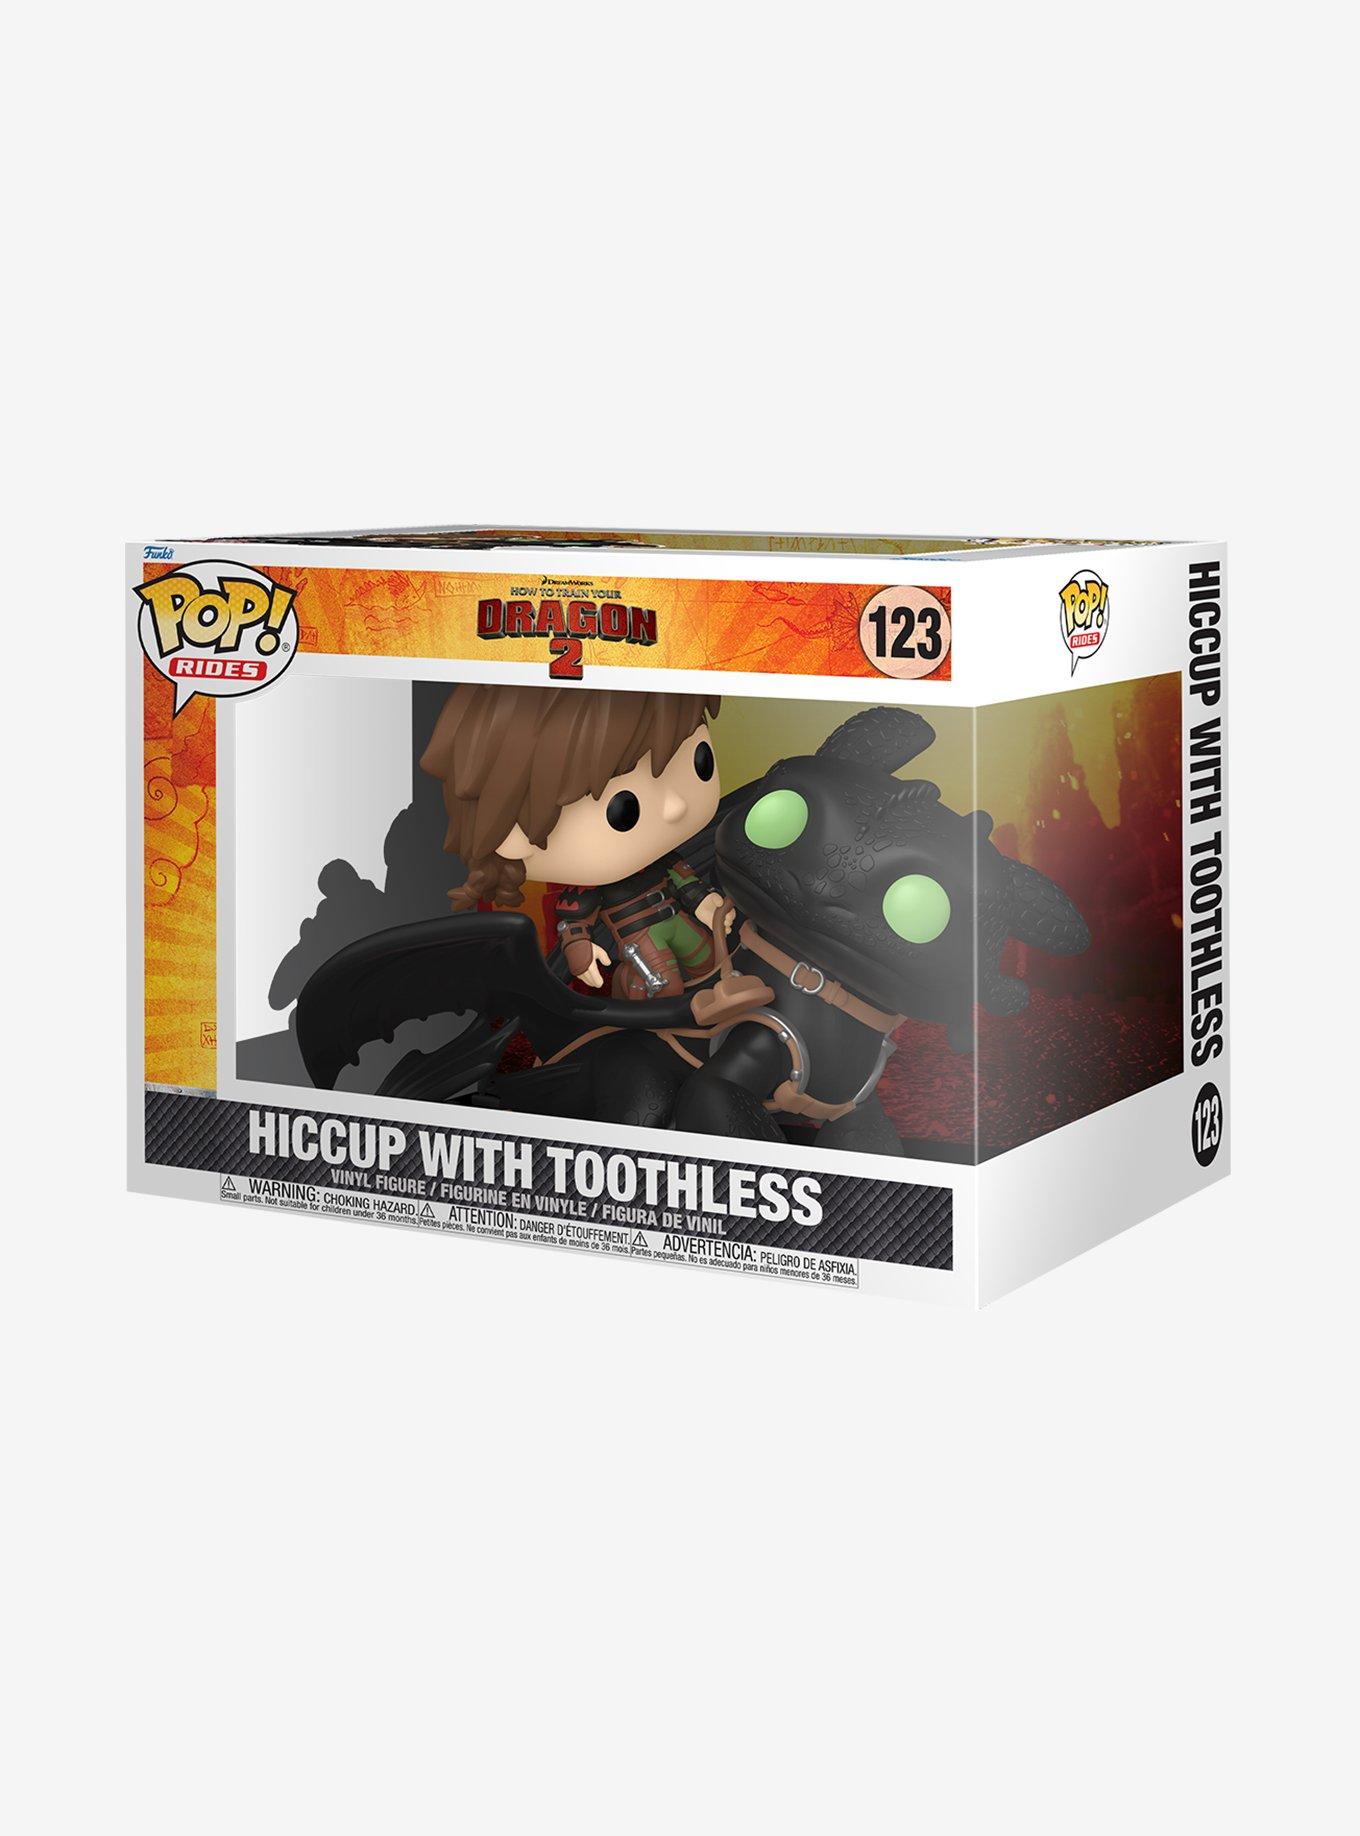 Funko Pop! Rides DreamWorks How to Train Your Dragon 2 Hiccup with Toothless Vinyl Figure, , hi-res